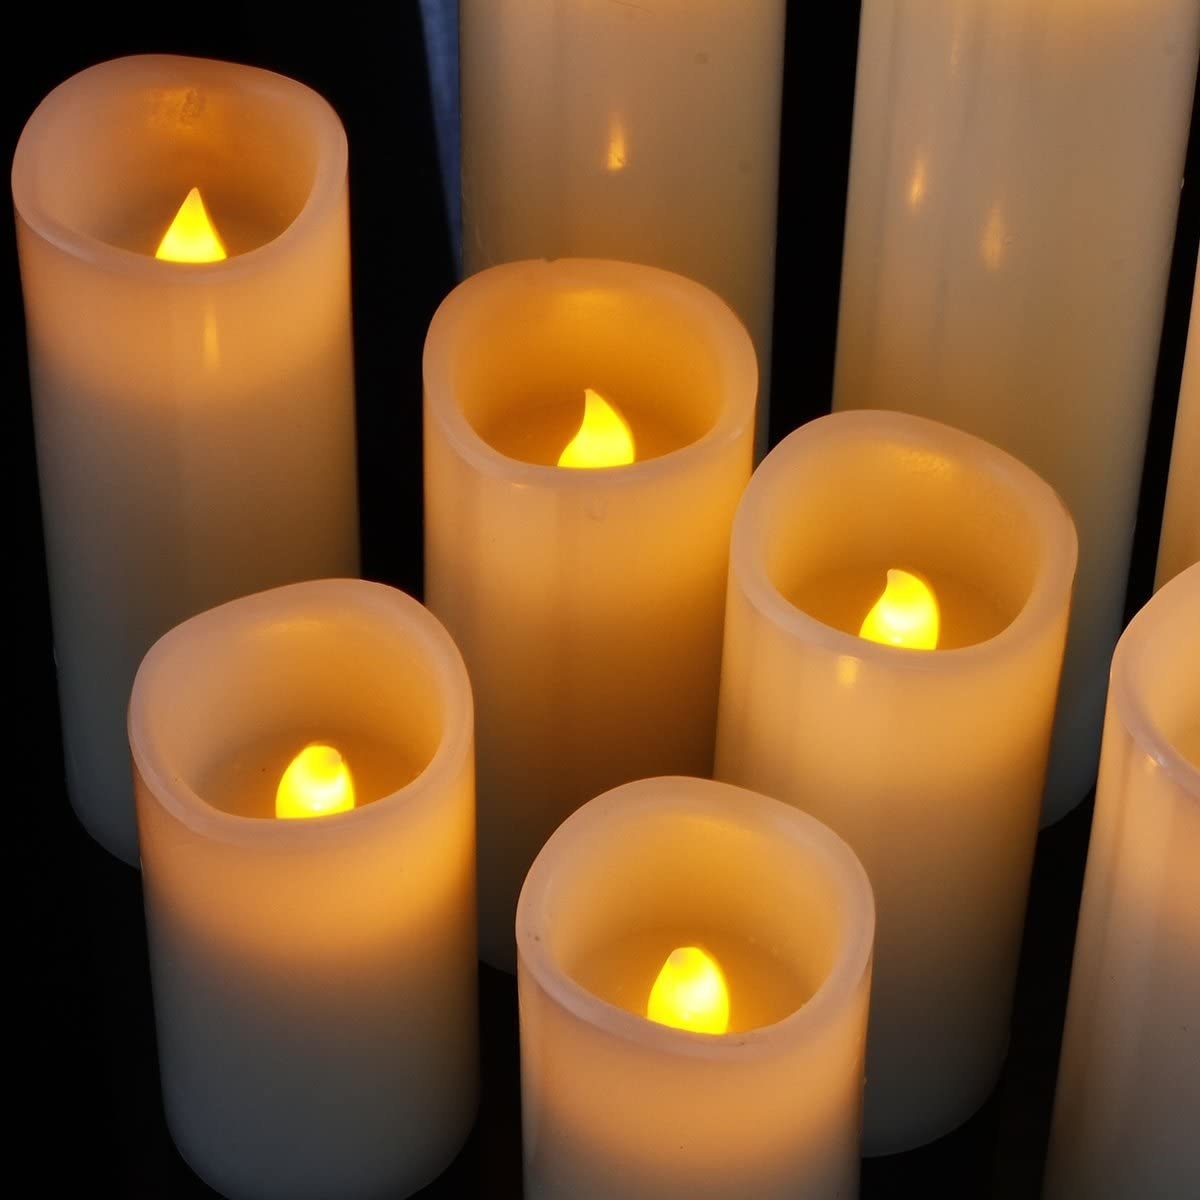 The candle set